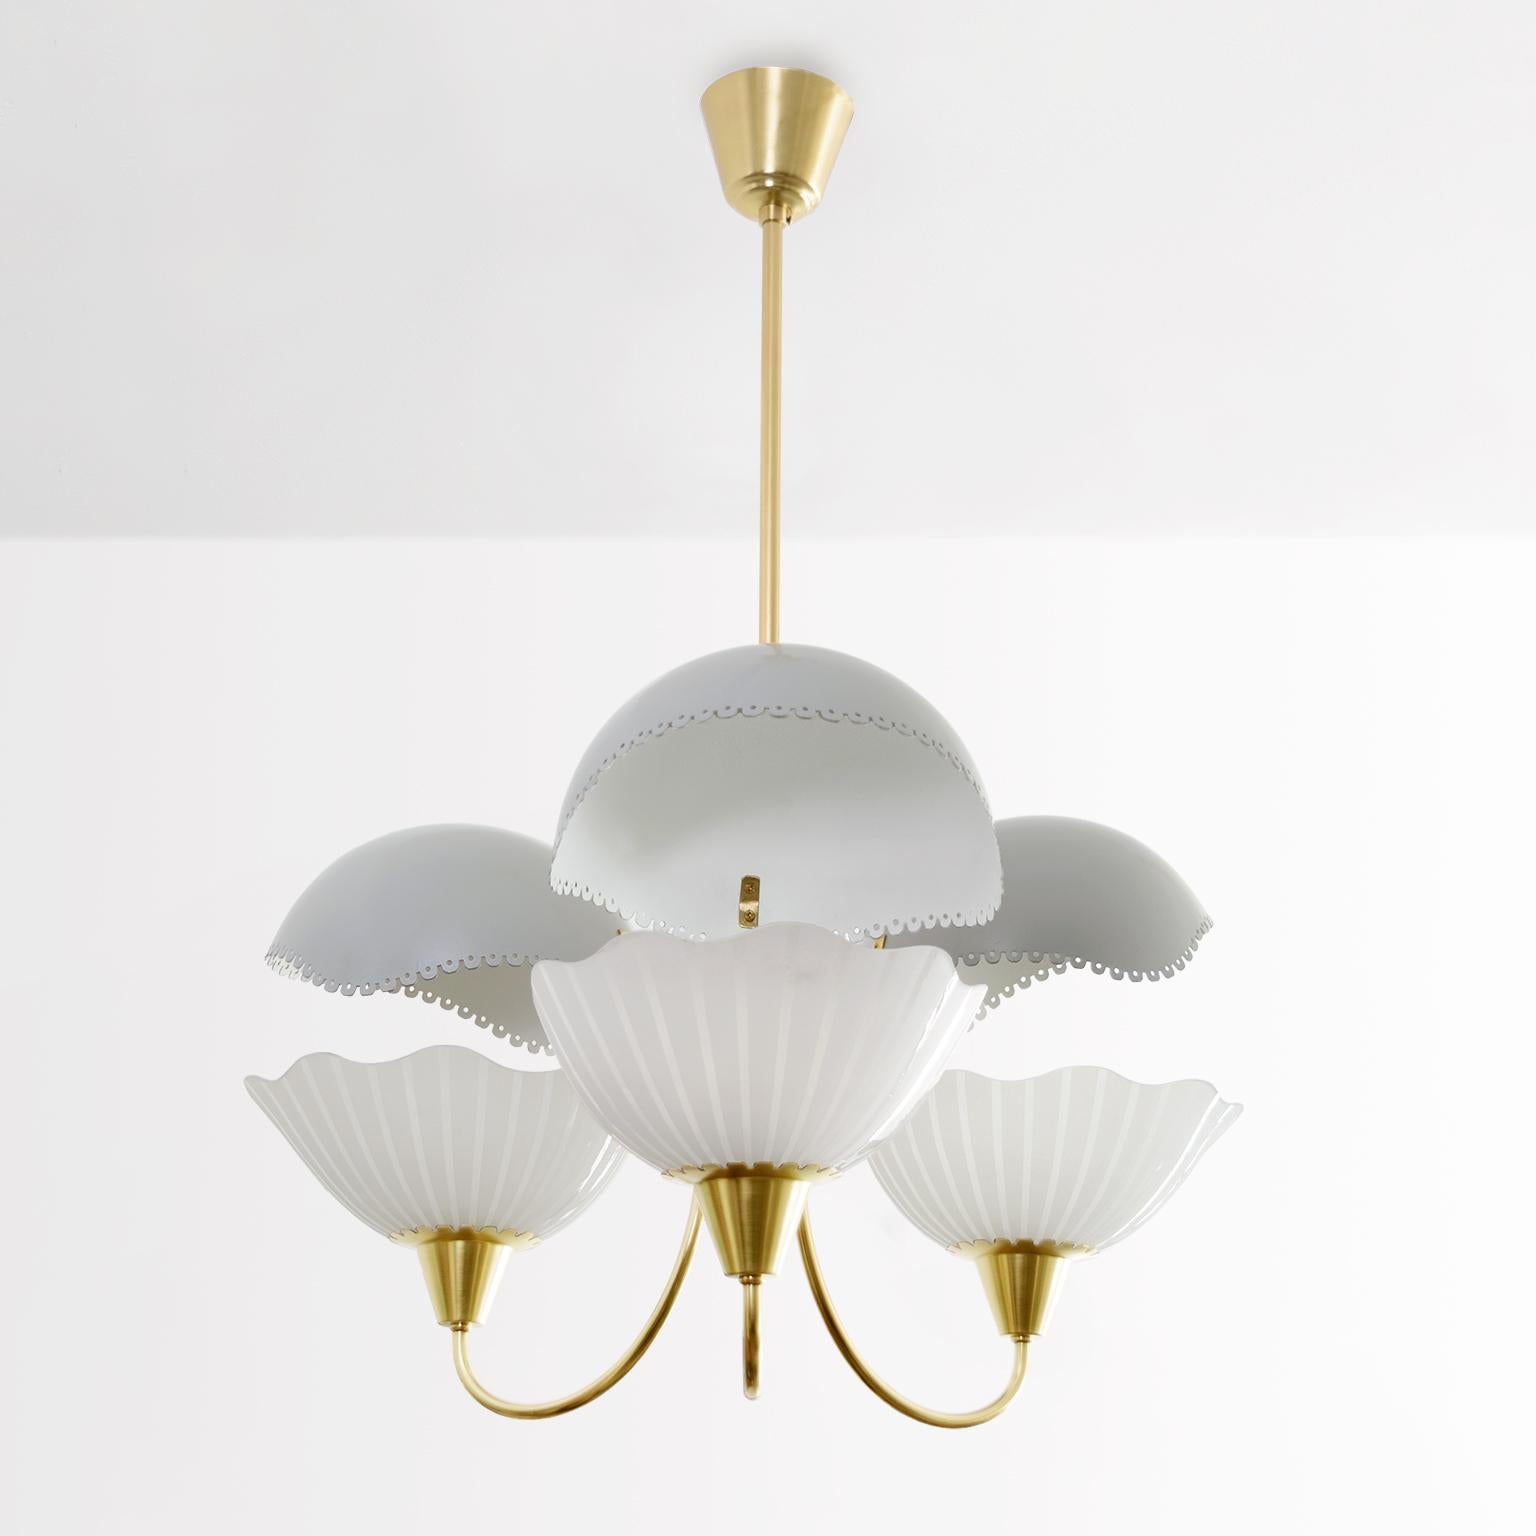 Scandinavian Modern Harald Notini desigend for Orrefors 3-arm Chandelier with 3 etched glass shades